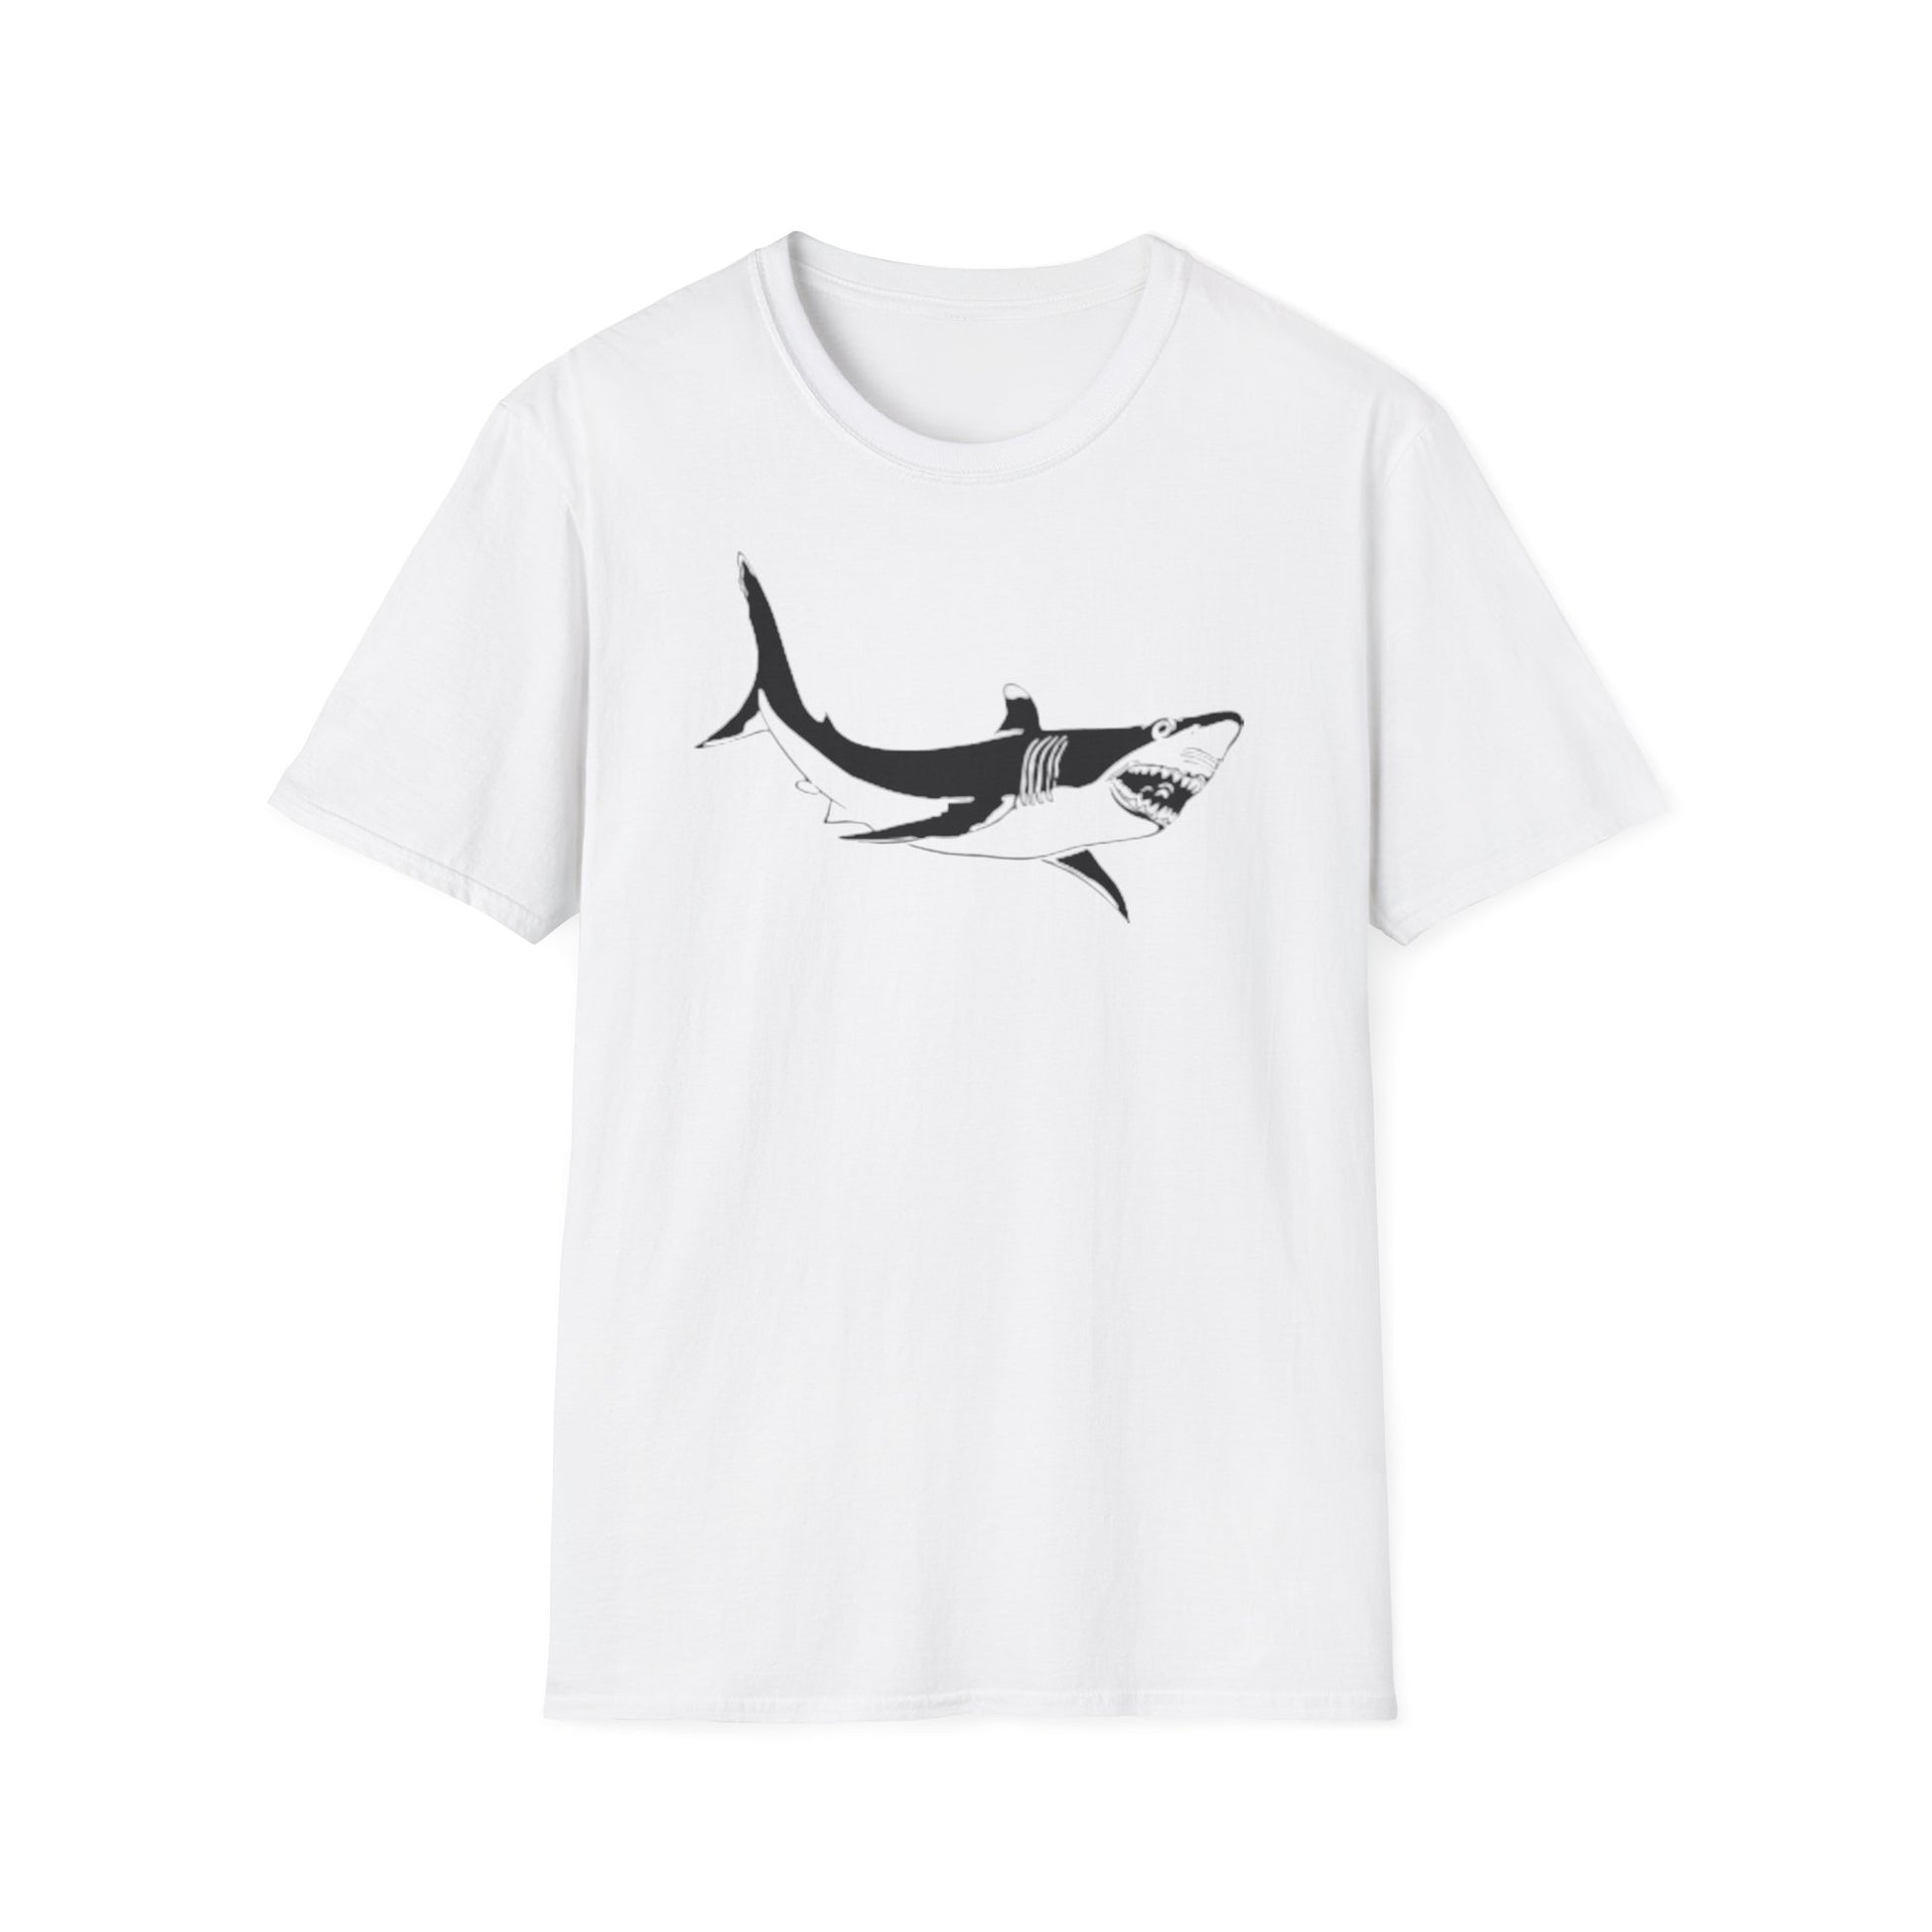 A white t-shirt with a design of a great white shark. The design is black and white